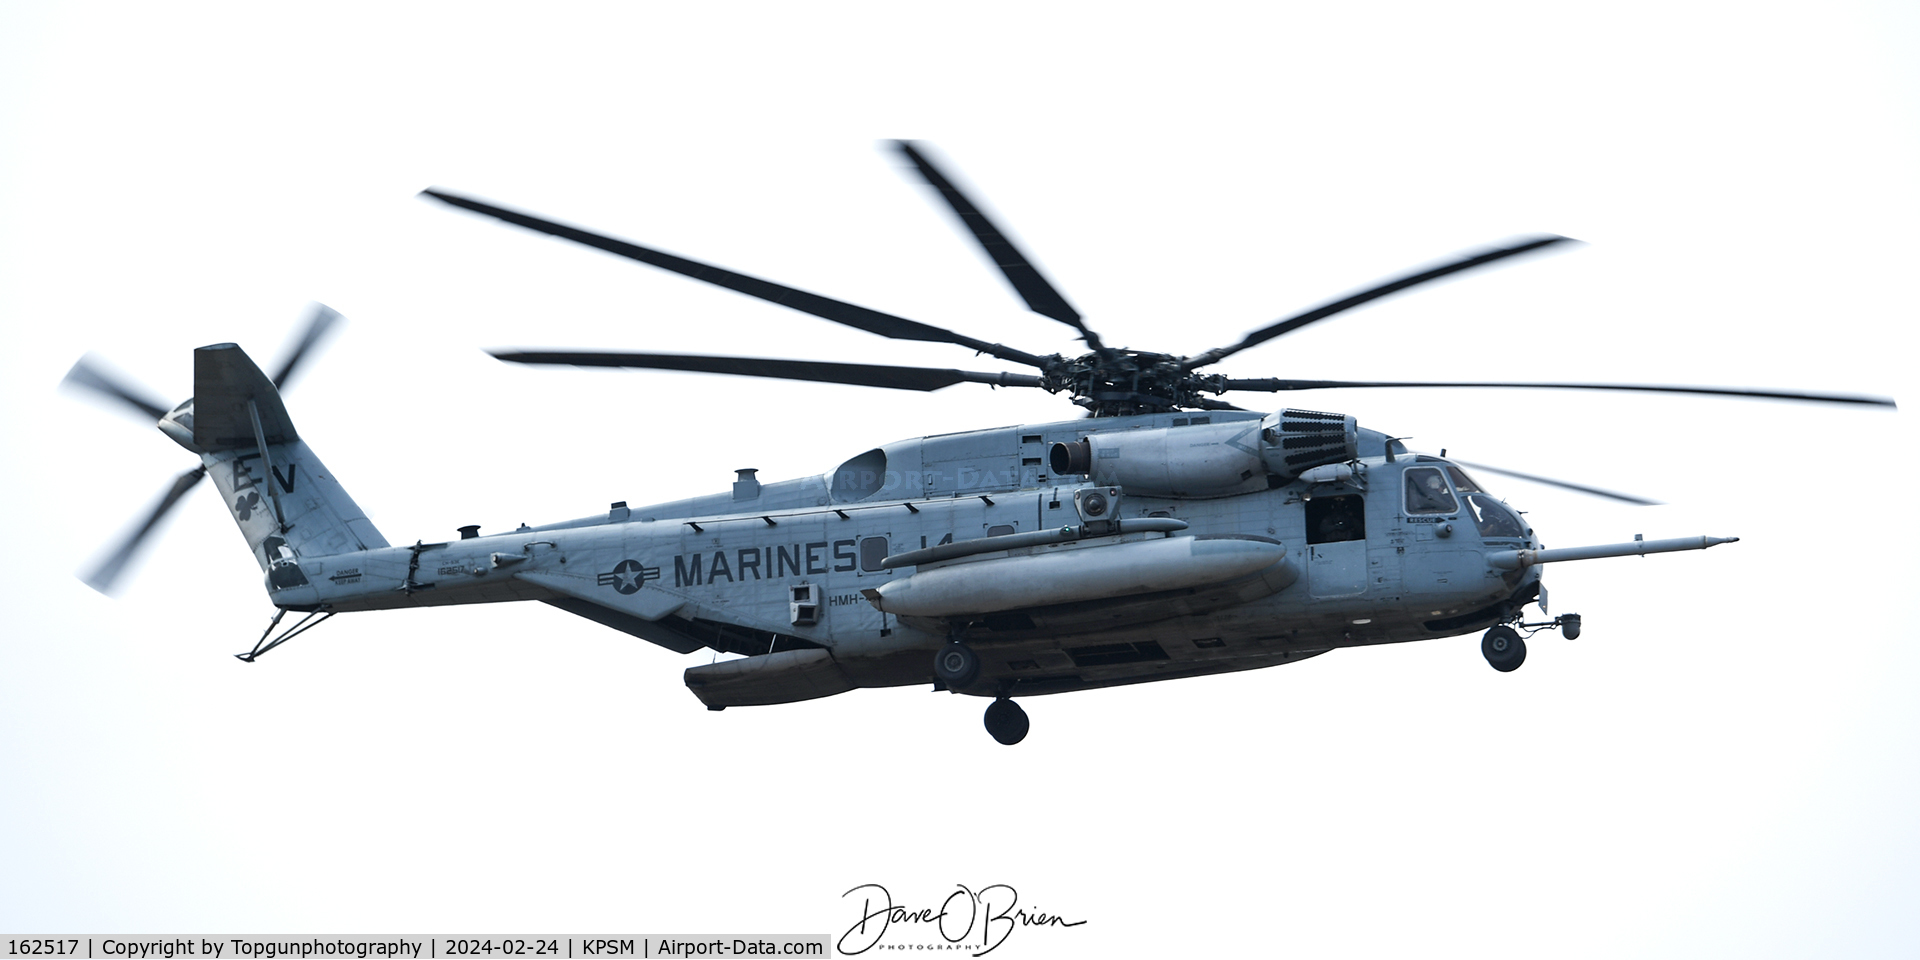 162517, Sikorsky CH-53E Super Stallion C/N 65-529, CONDOR41, now with HMH-464 Condors of MCAS New River. EN-14 is the tail code.